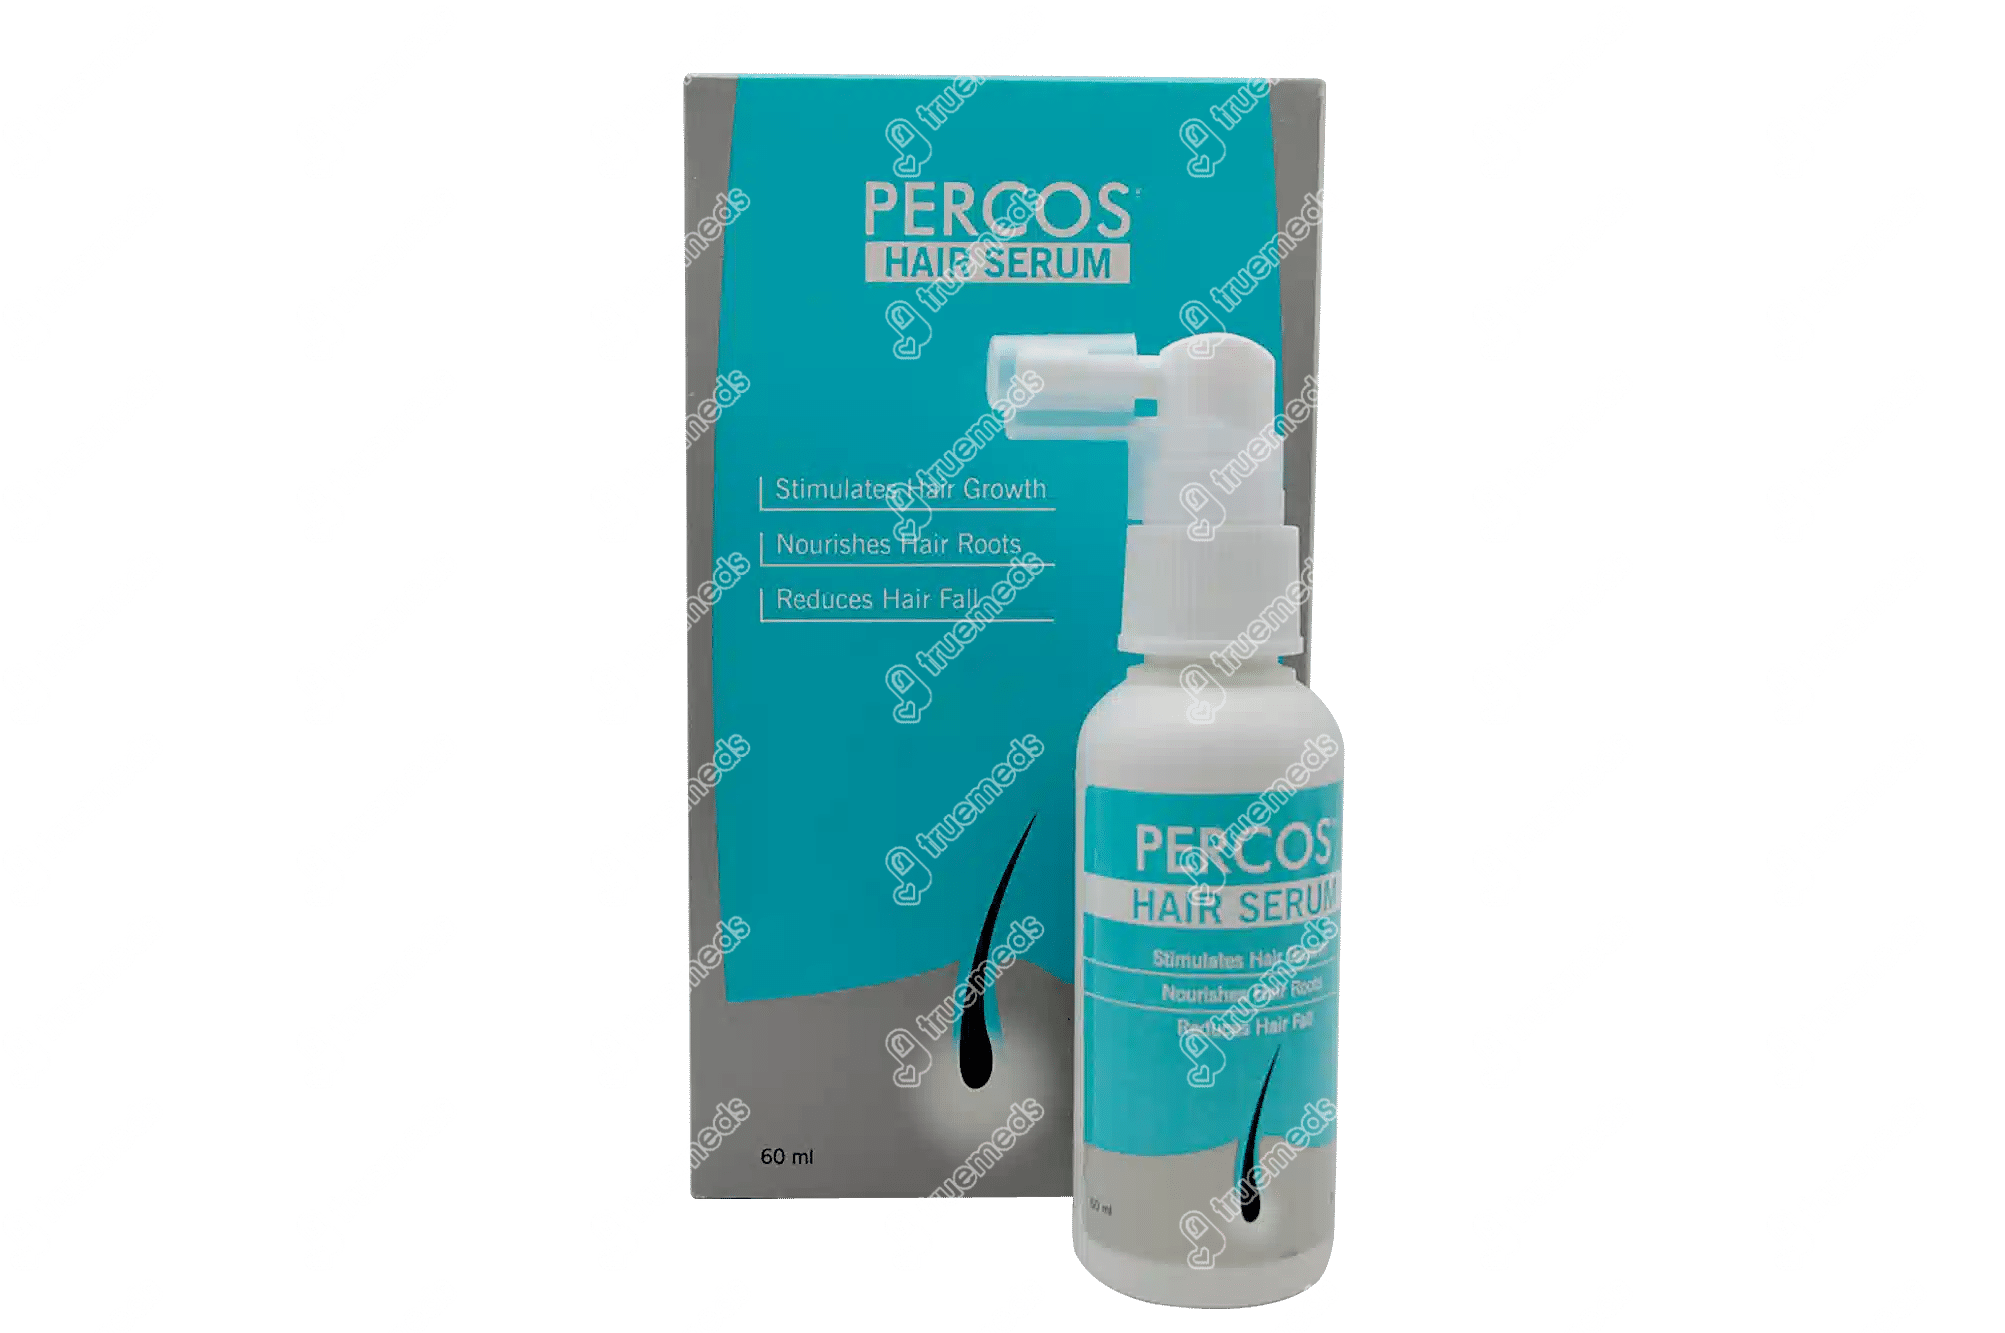 Percos Hair Serum 60 ML - Uses, Side Effects, Dosage, Price | Truemeds